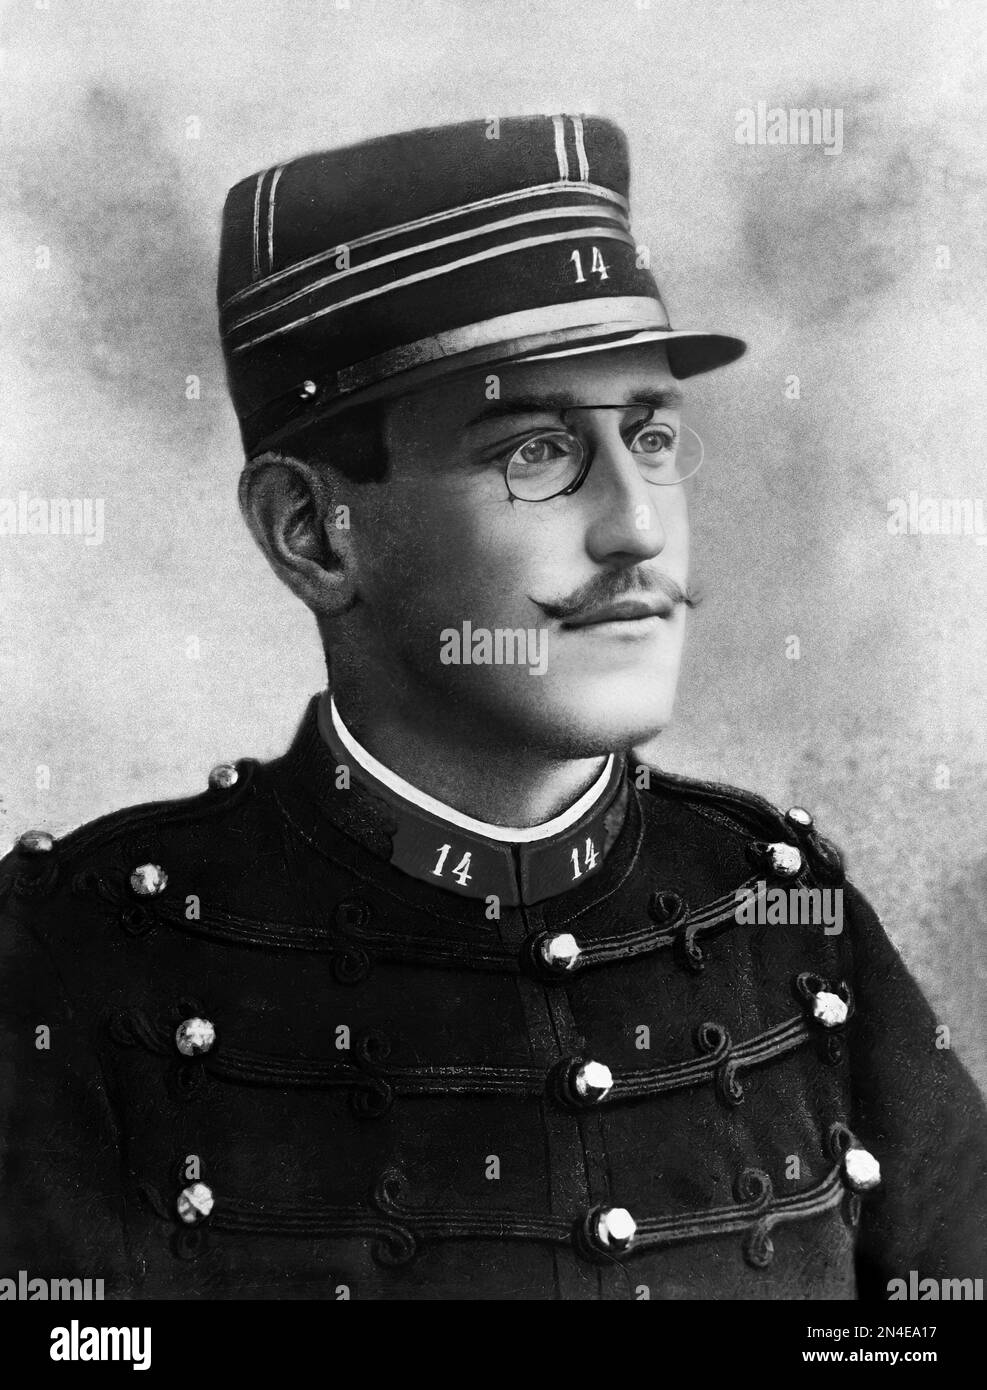 Alfred Dreyfus. Portrait of the French army officer accused of treason, Alfred Dreyfus (1859-1935) by Aron Gerschel, c. 1894 Stock Photo